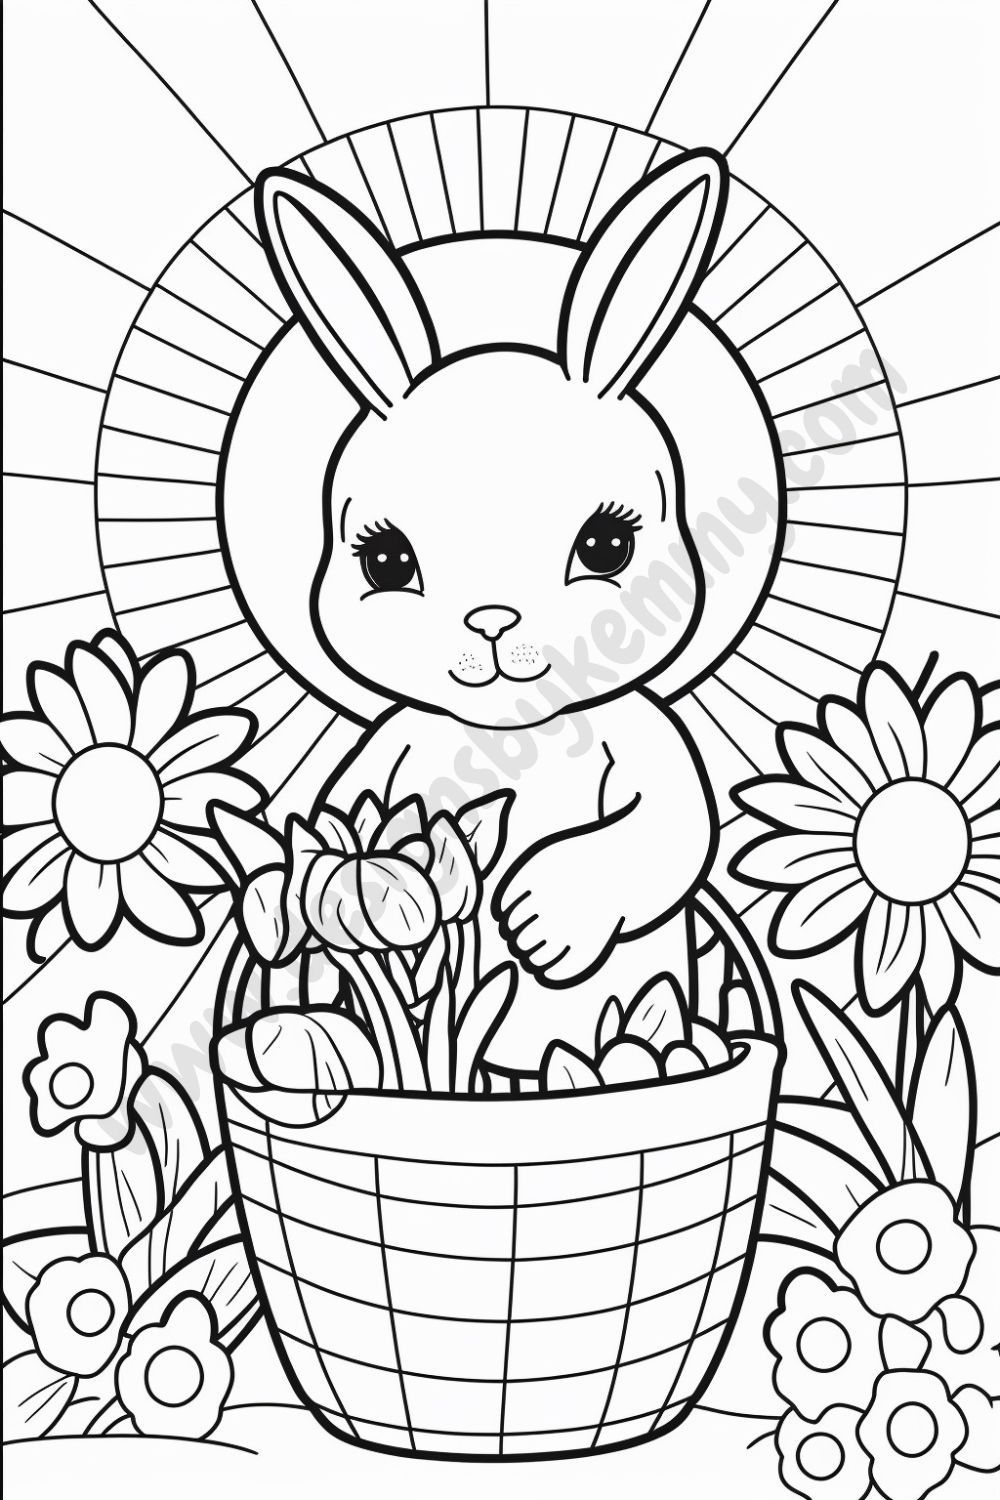 Free Easter Coloring Pages | Easter Coloring Pages for Kids| Designs By Kemmy